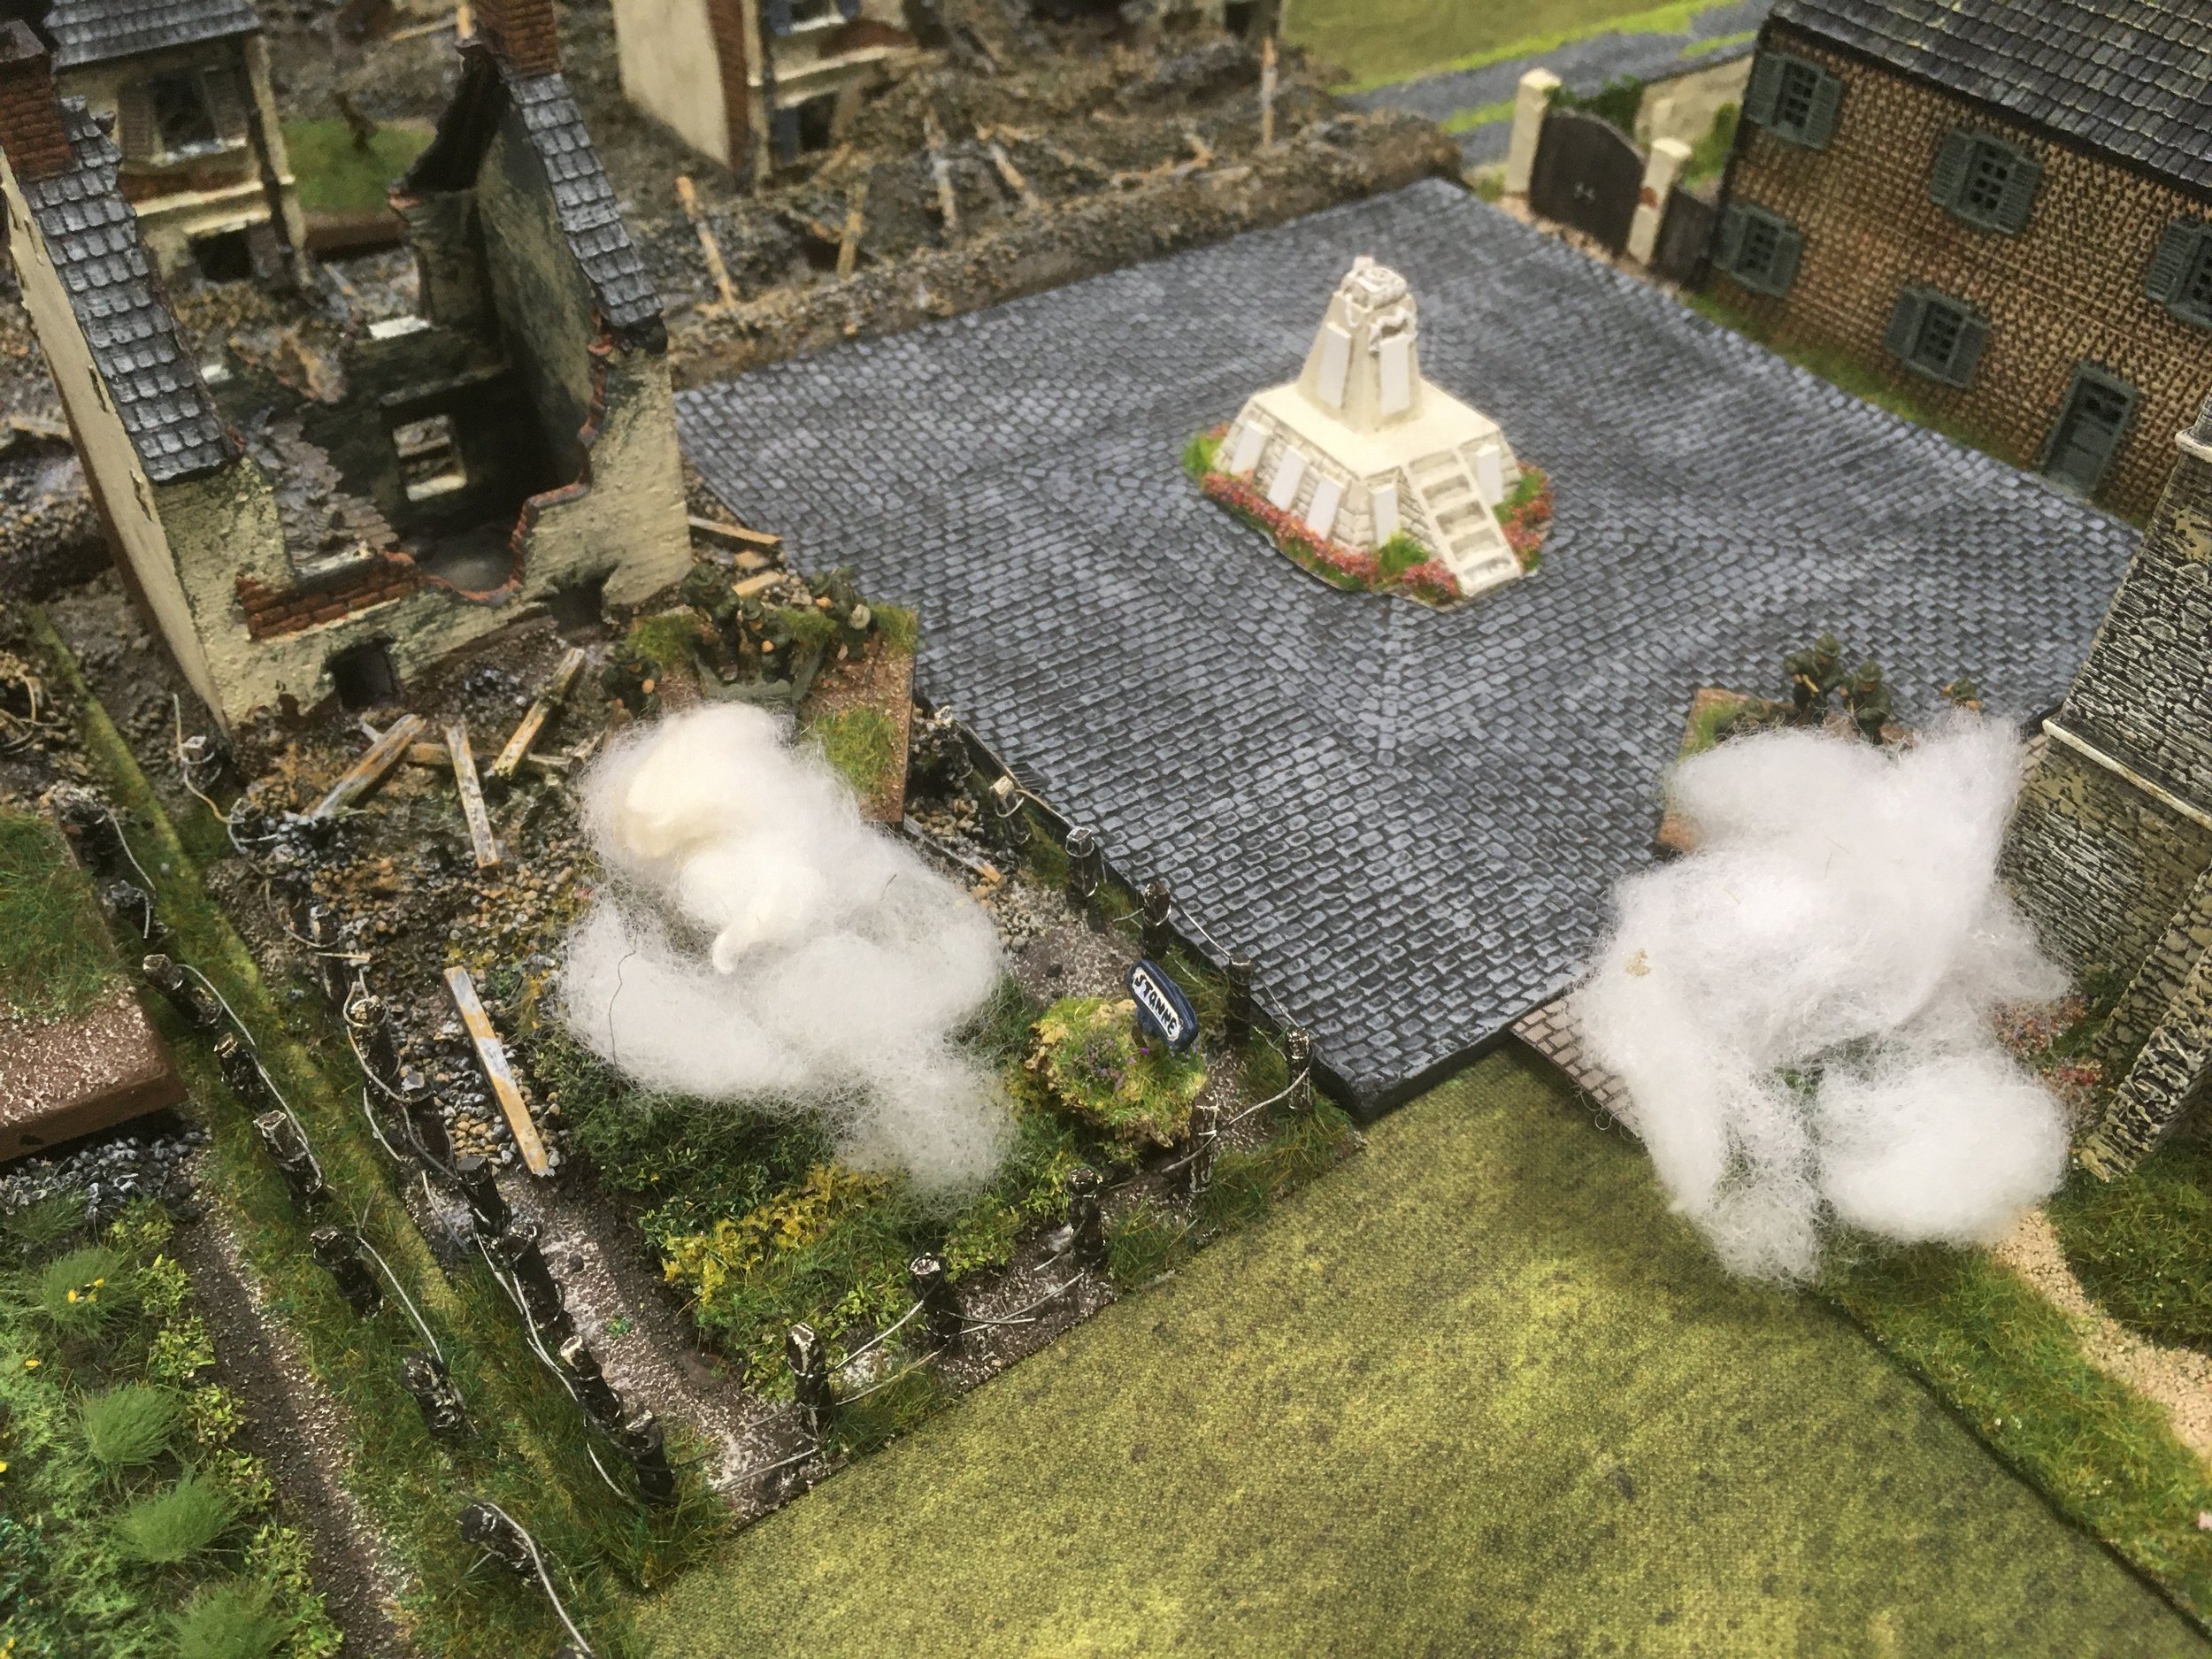 Targeting the German armoured cars, both the Hotchkiss SA34's open fire!